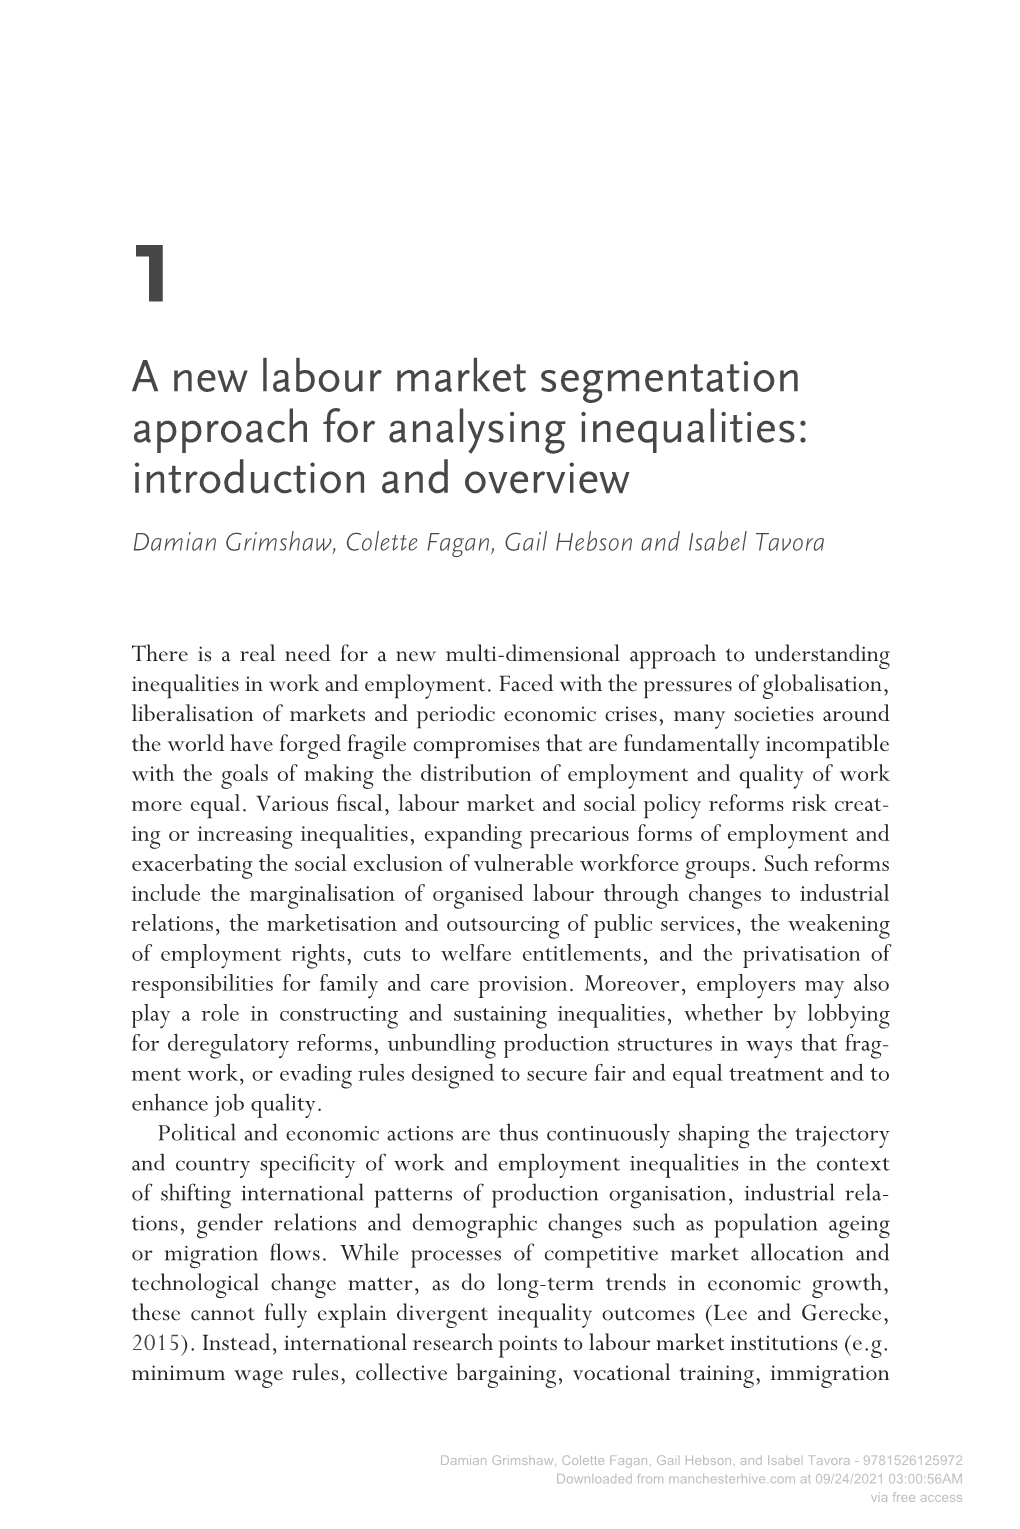 A New Labour Market Segmentation Approach for Analysing Inequalities: Introduction and Overview Damian Grimshaw, Colette Fagan, Gail Hebson and Isabel Tavora